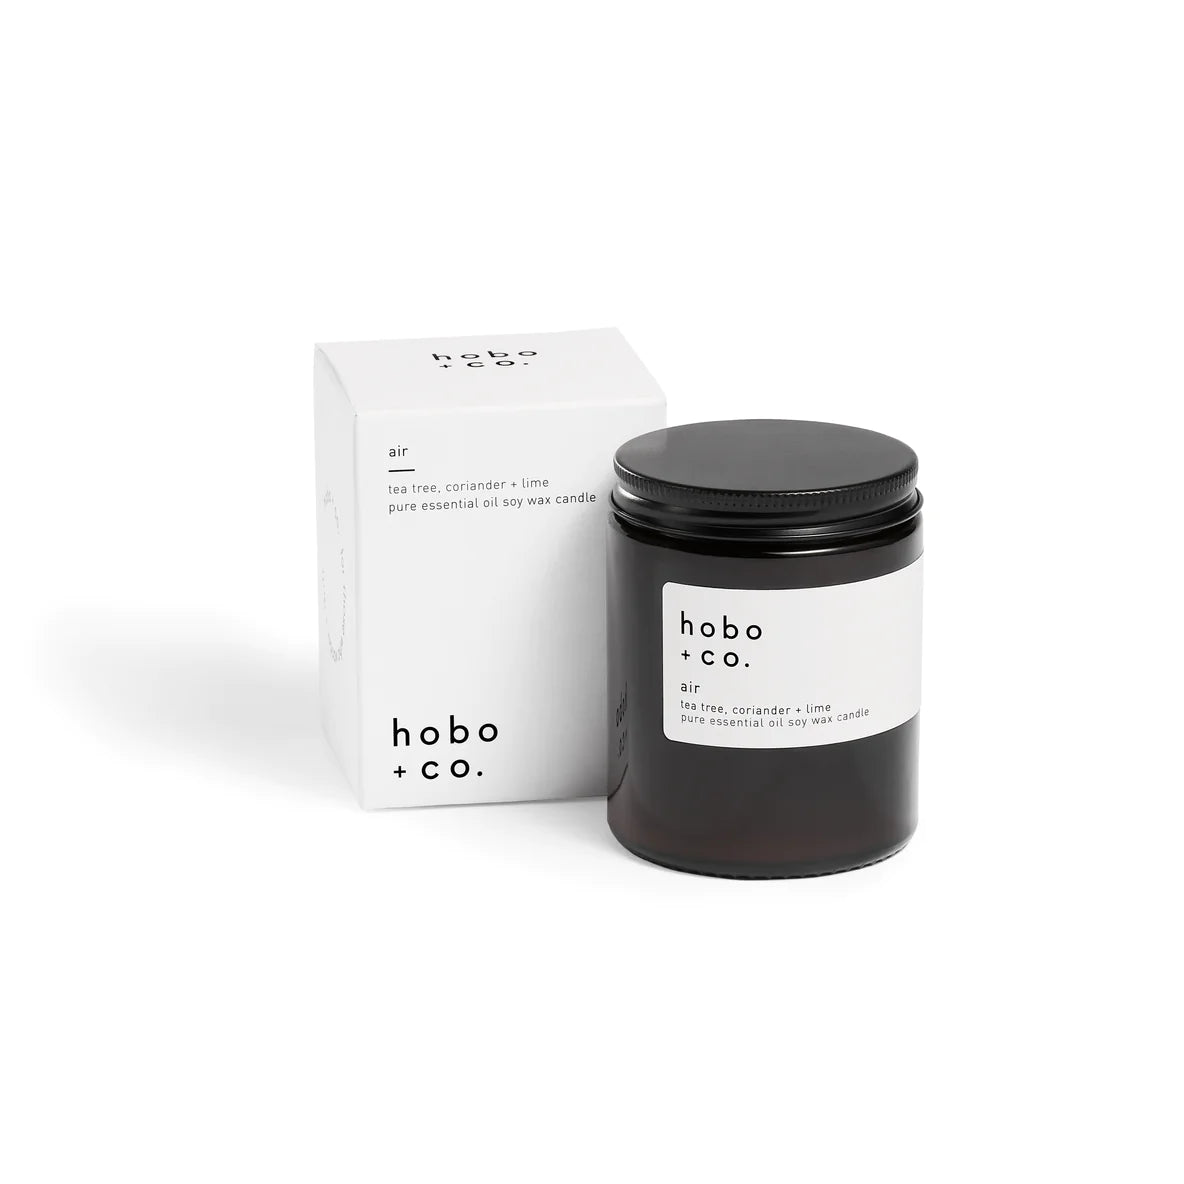 Hobo + Co Air Aromatherapy Essential Oil Soy Wax Candle